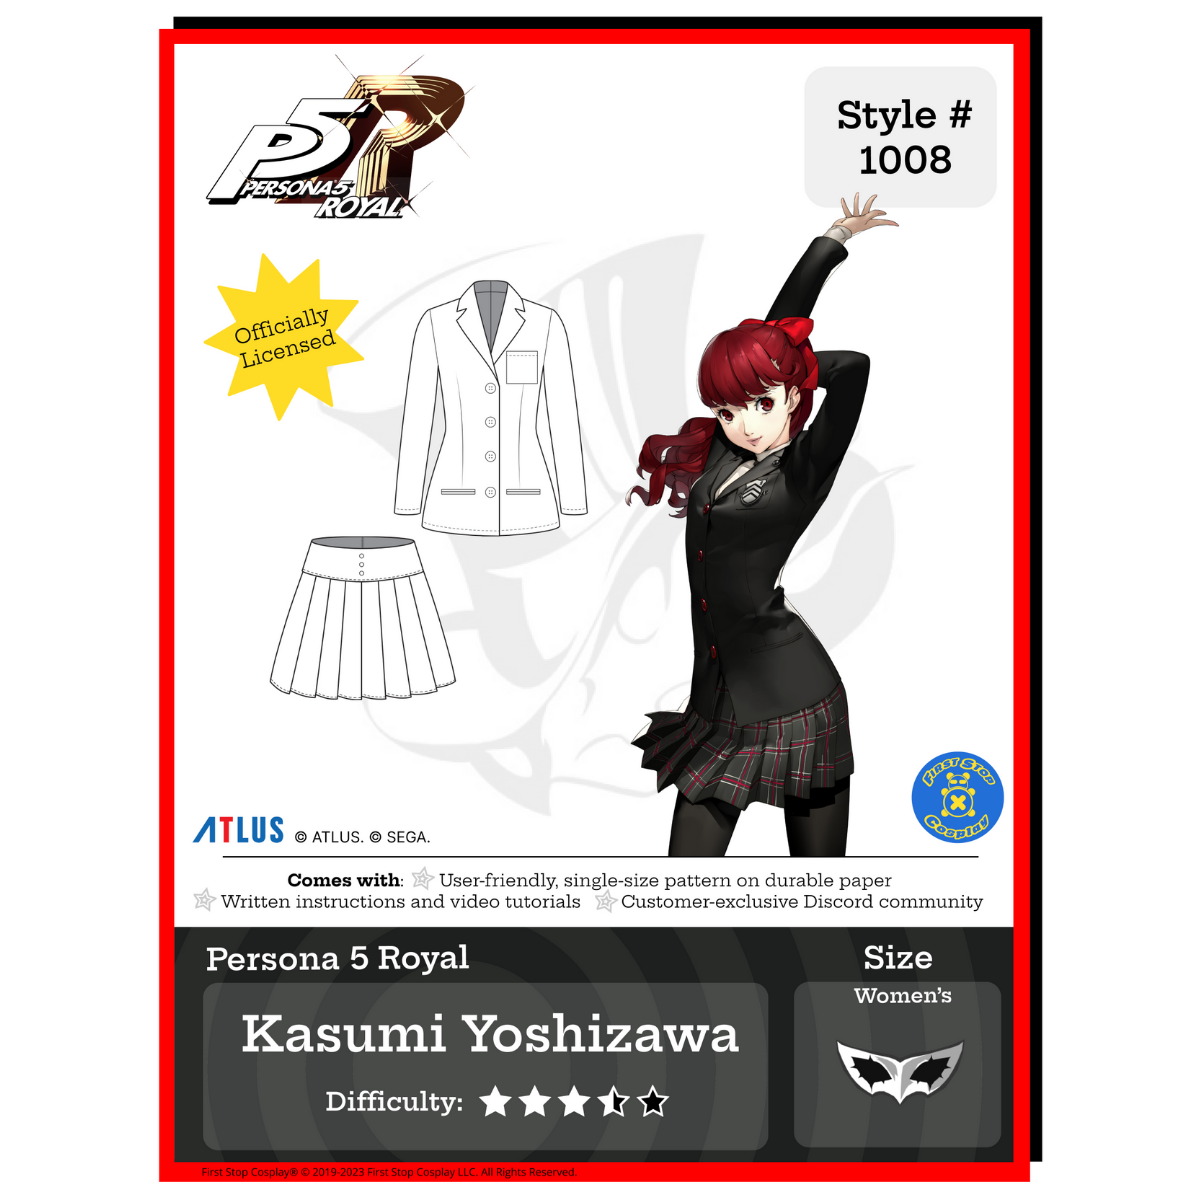 A graphic of the front packaging for Style #1008- Kasumi Yoshizawa. The Persona 5 Royal logo is in the top left corner. Below the logo is an "officially licensed" stamp. Below the stamp is the line art of the completed pattern. To the right is an image of Persona 5 Royal's character, Kasumi, wearing her Shujin school uniform outfit. To the right of Kasumi, in the corner, is the First Stop Cosplay circle logo. This pattern is 3 1/2 star in difficulty rating and follows our women's size chart.